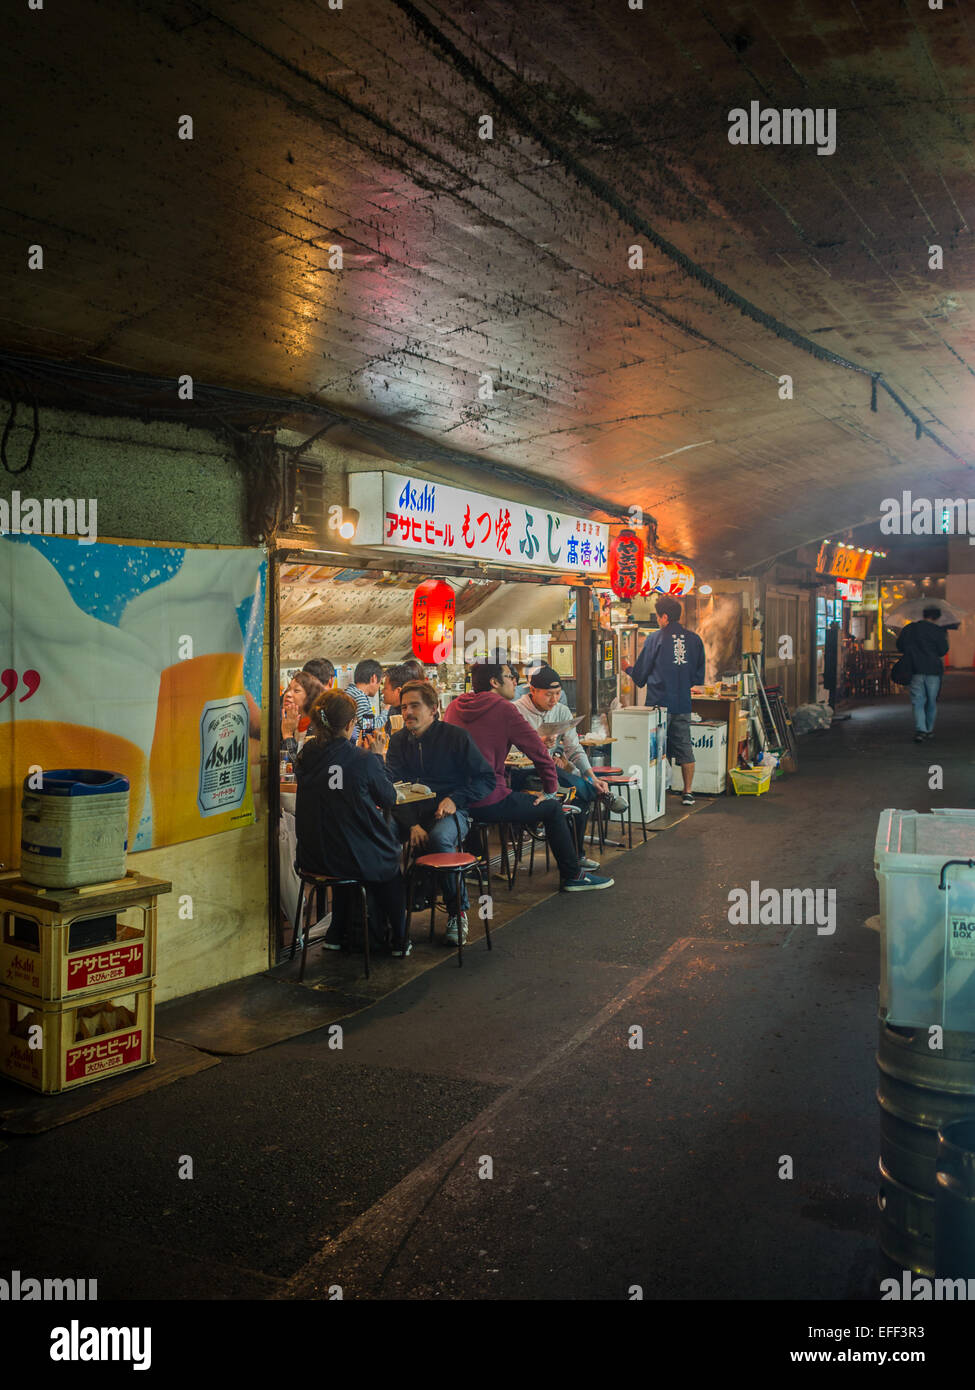 People eating in a street food place under the train tracks in central Tokyo Stock Photo